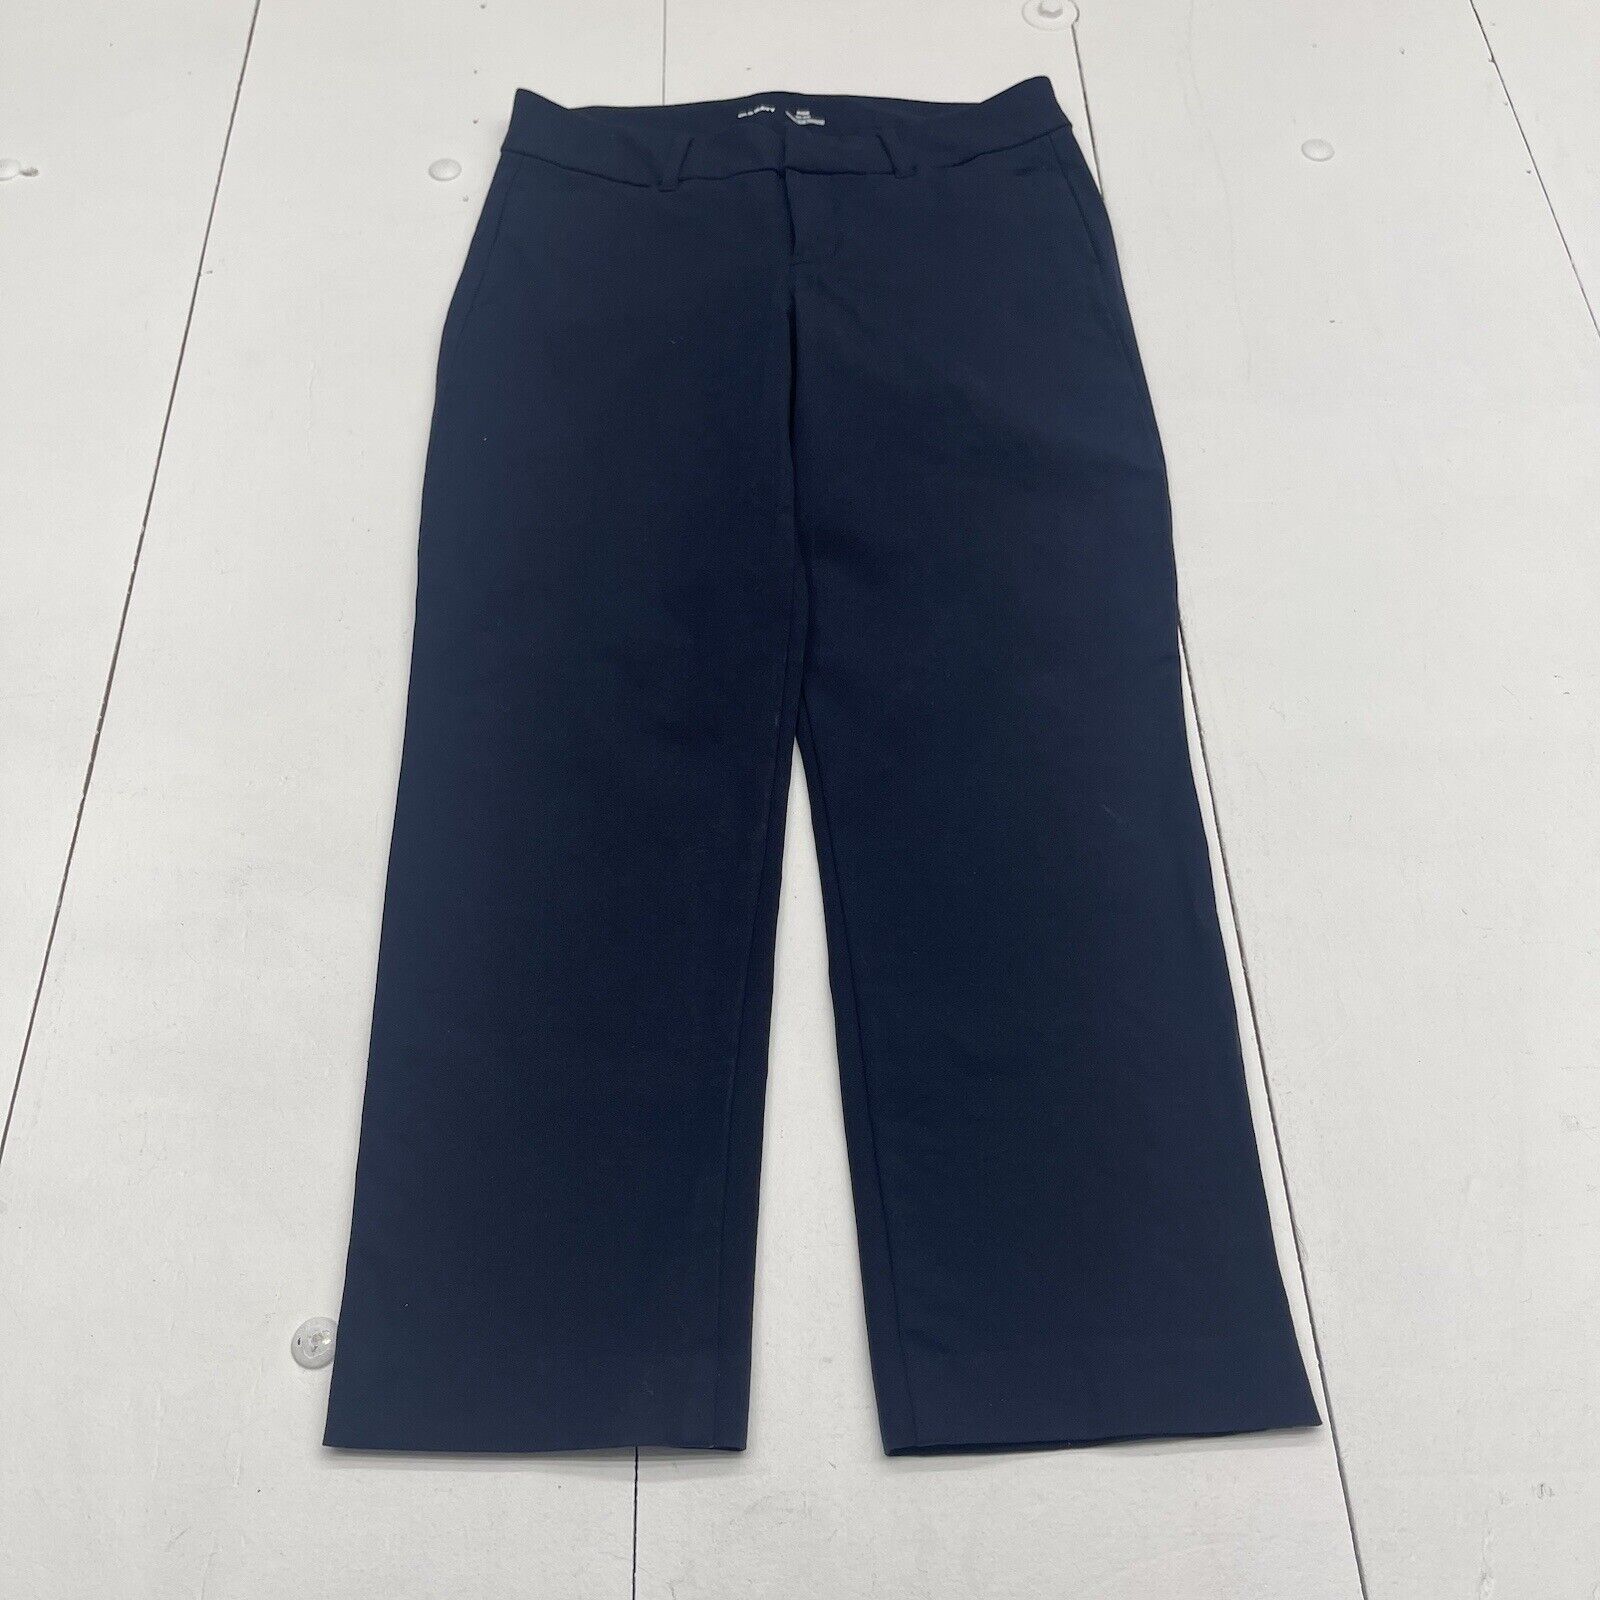 Old Navy Pixie Pant Wide Leg